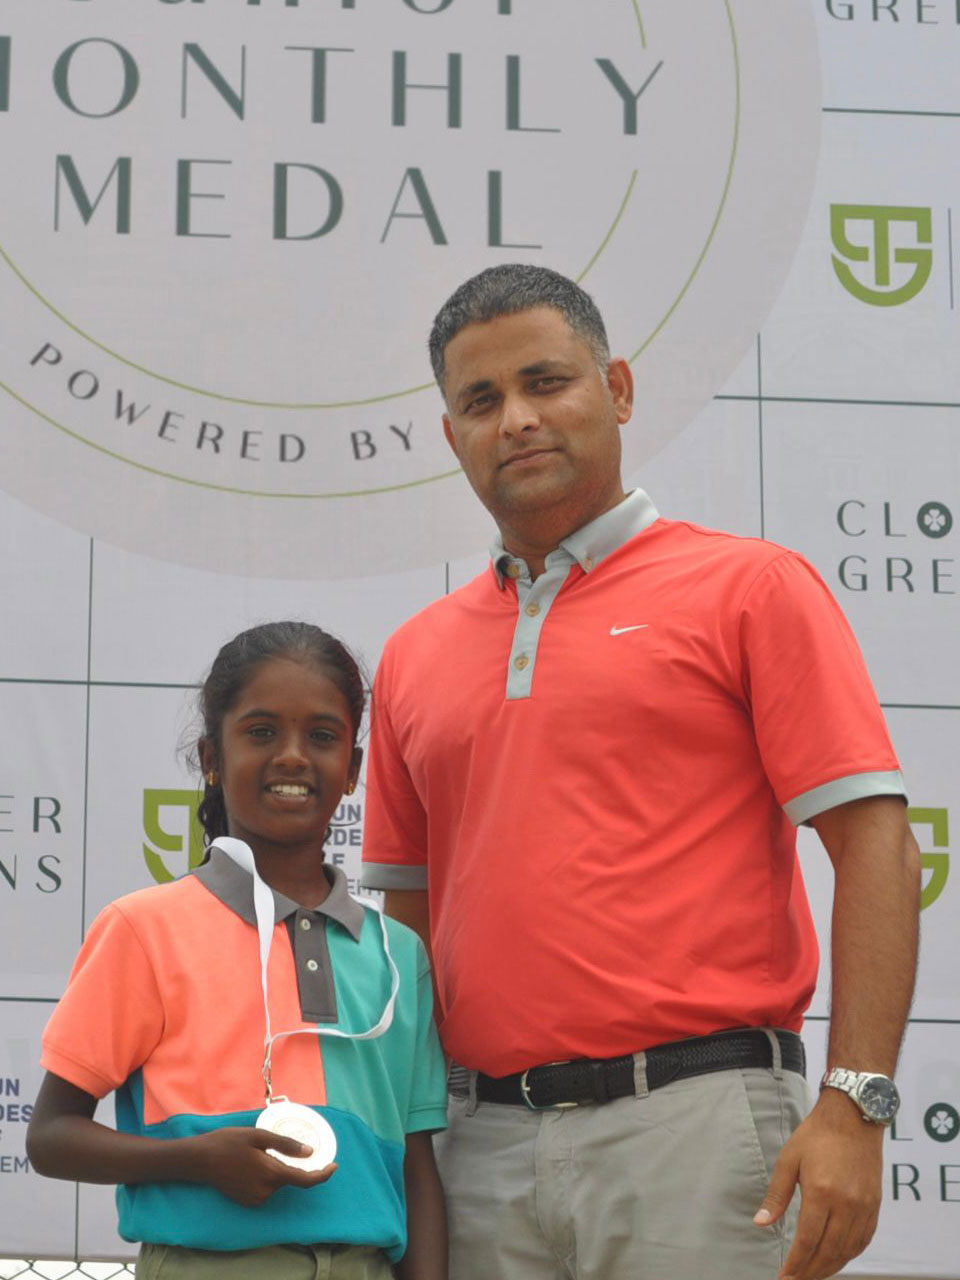 Arpita Shaji finished as runner up in the 'D' Girls Category at the Clover Greens Junior Monthly Medal powered by TSG, held at Clover Greens Golf Course in Bangalore.